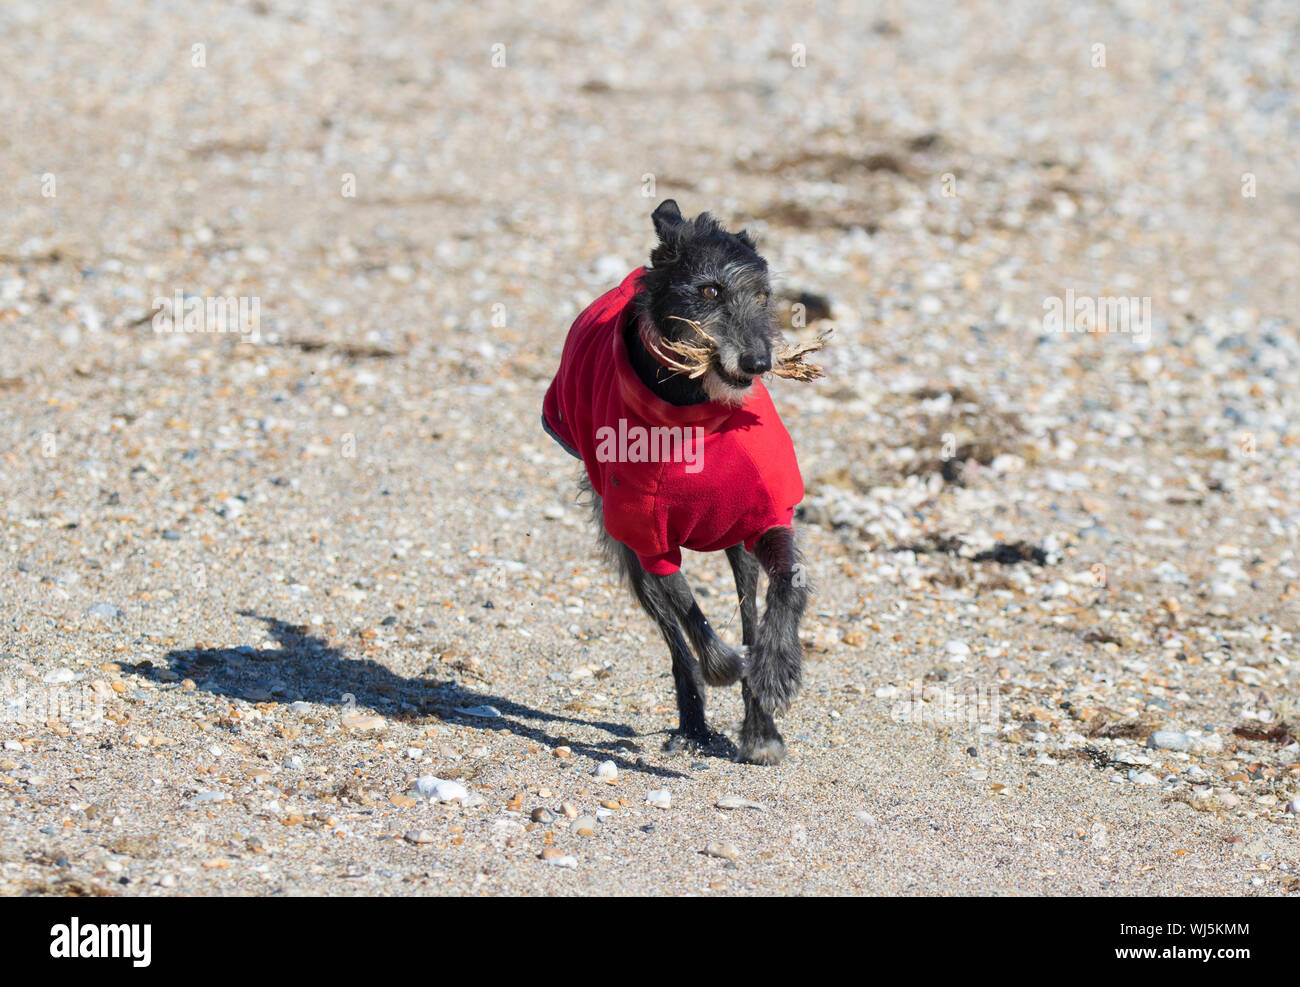 Lurcher dog wearing red coat running with a stick. North Norfolk, UK. Stock Photo